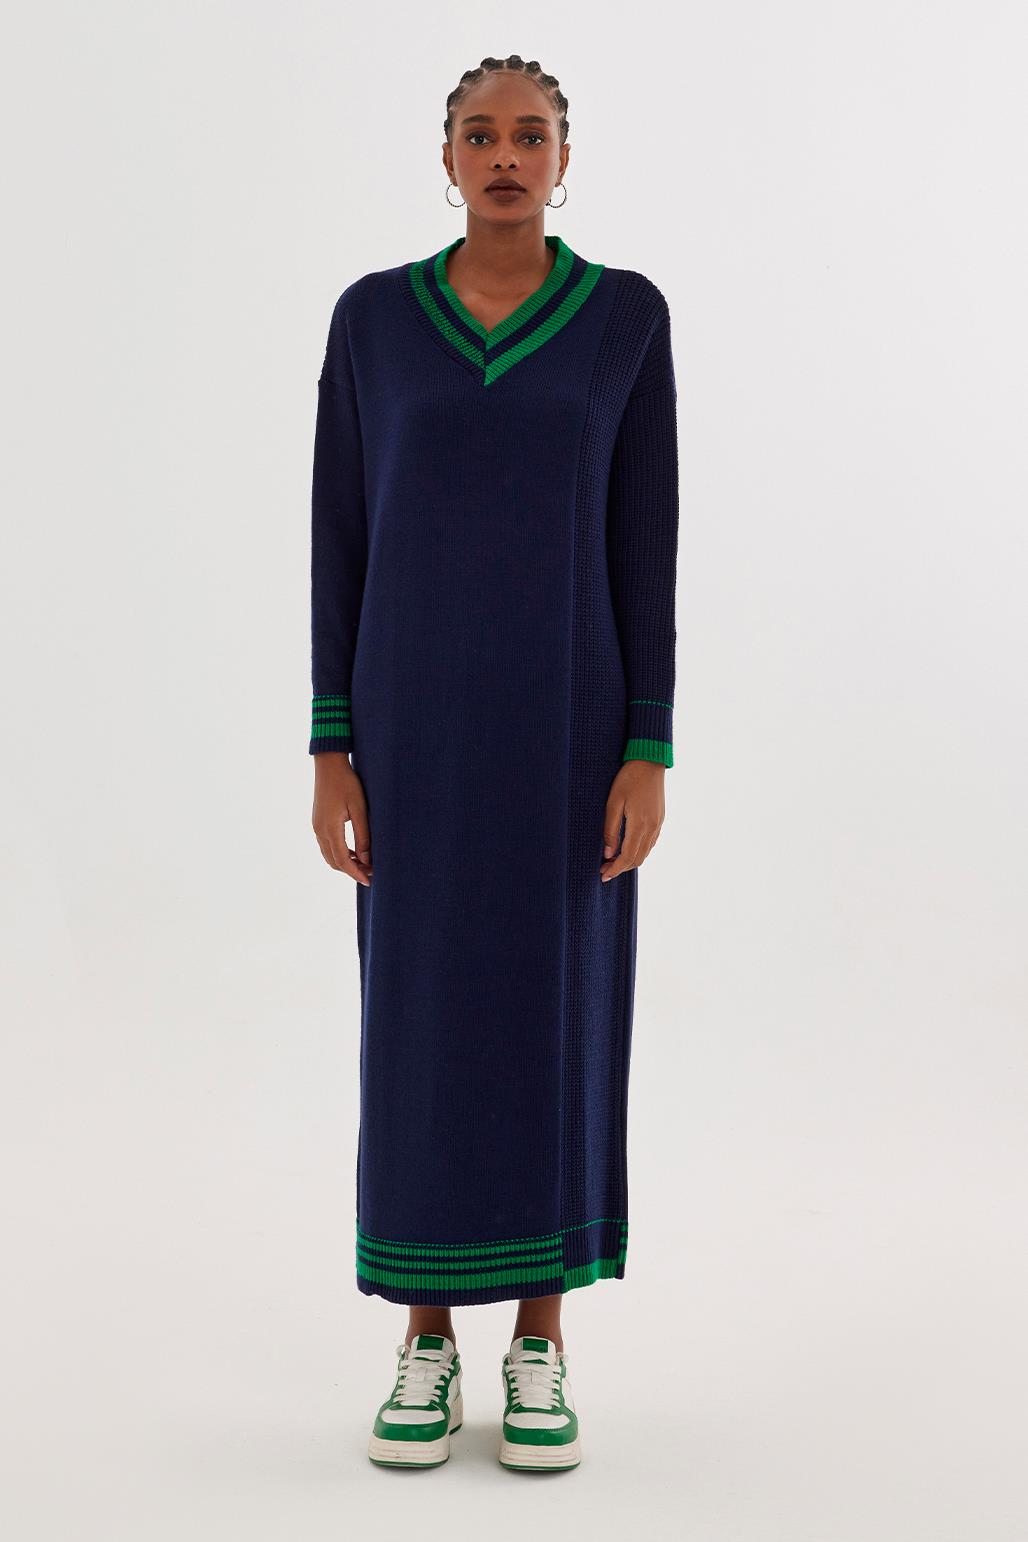 Knitted Dress Navy Blue